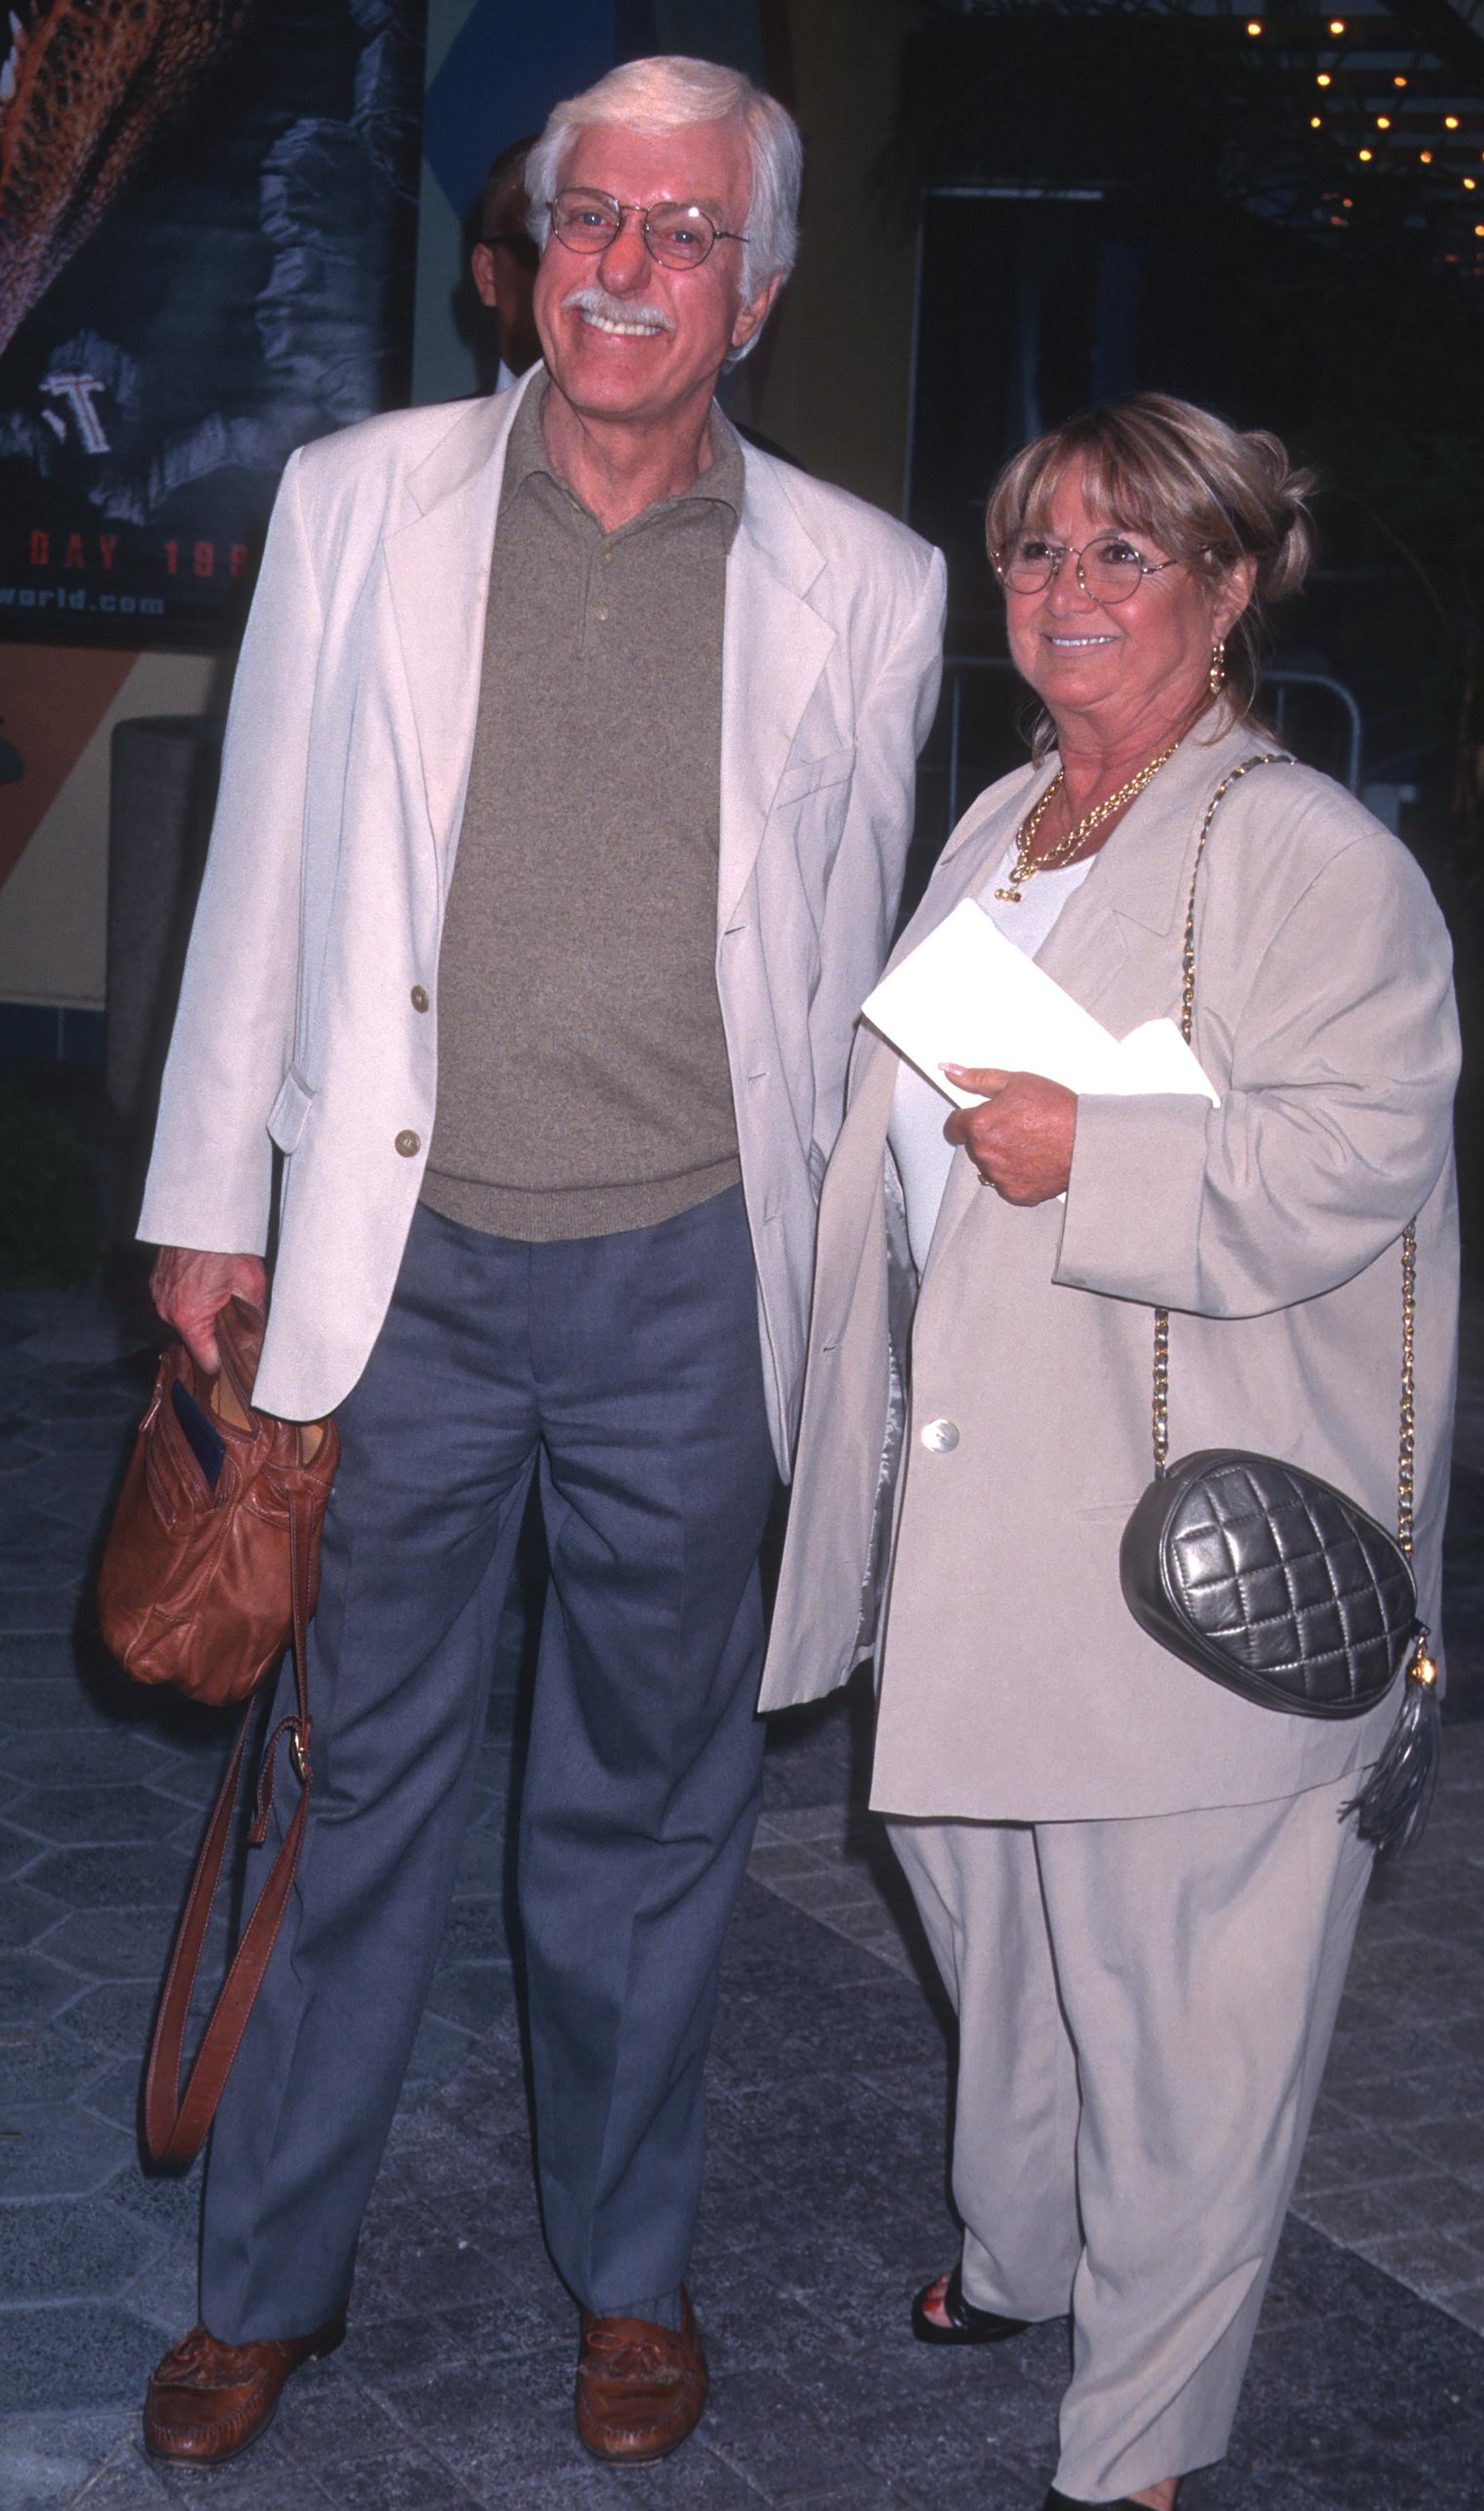 Dick Van Dyke and Michelle Triola attend "The Lost World" screening at Cineplex Odeon Cinema on May 19, 1997 in Universal City, California | Source: Getty Images